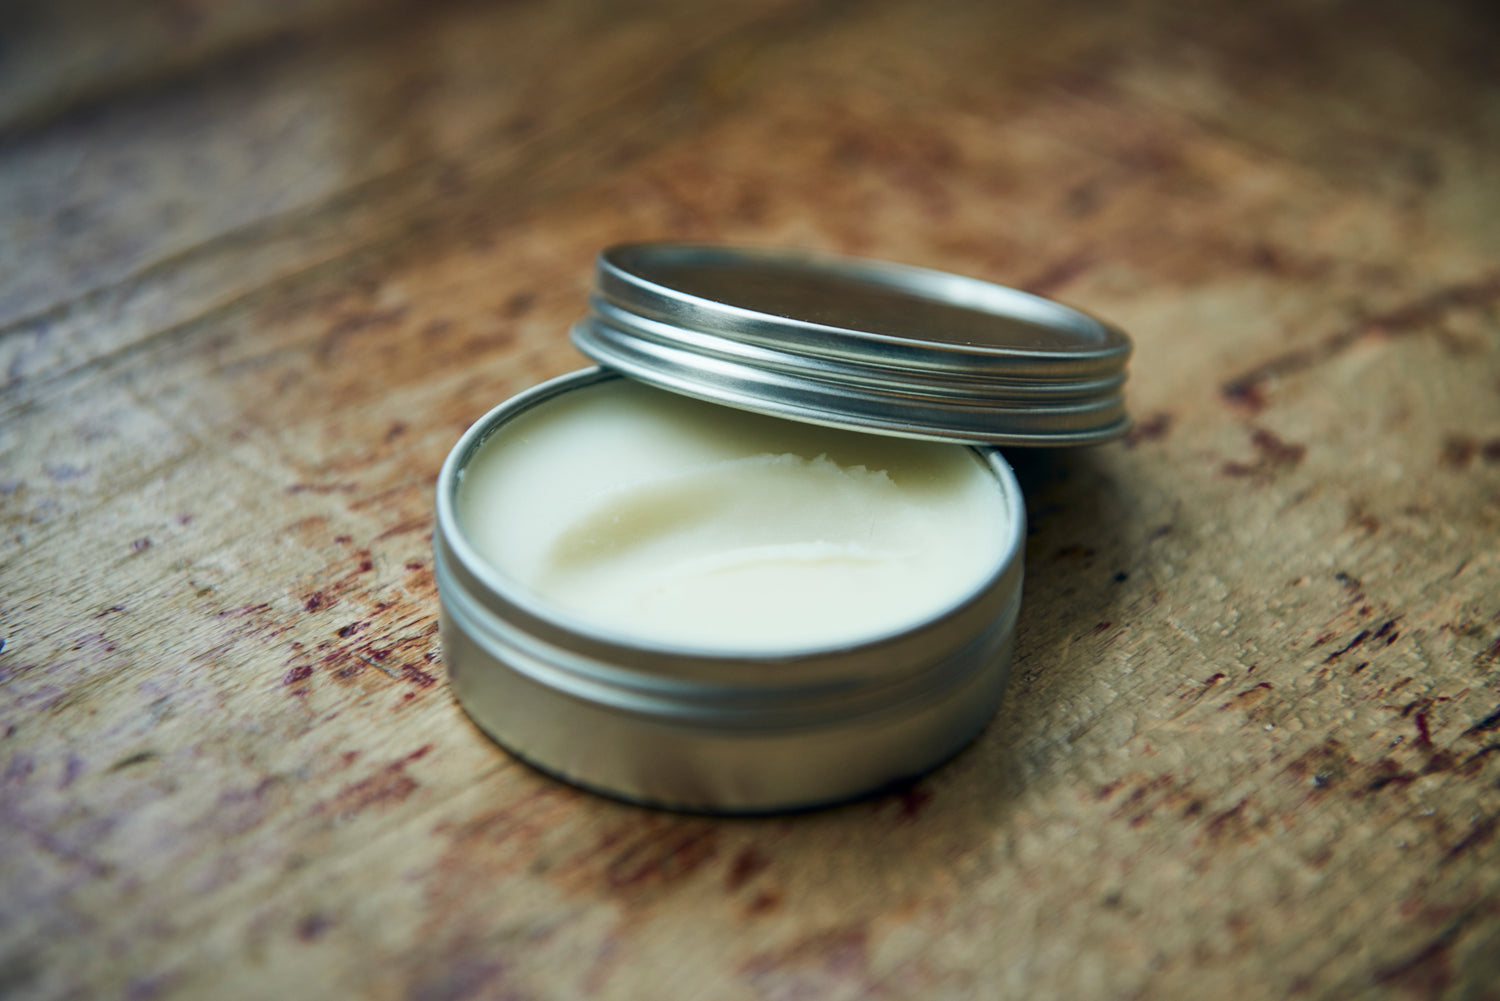 Heal Thy Self-Healing Balm. It can be applied to hands to prevent dry skin from over washing. May apply to scrapes, cuts, dry skin, burns, and even chapped lips.